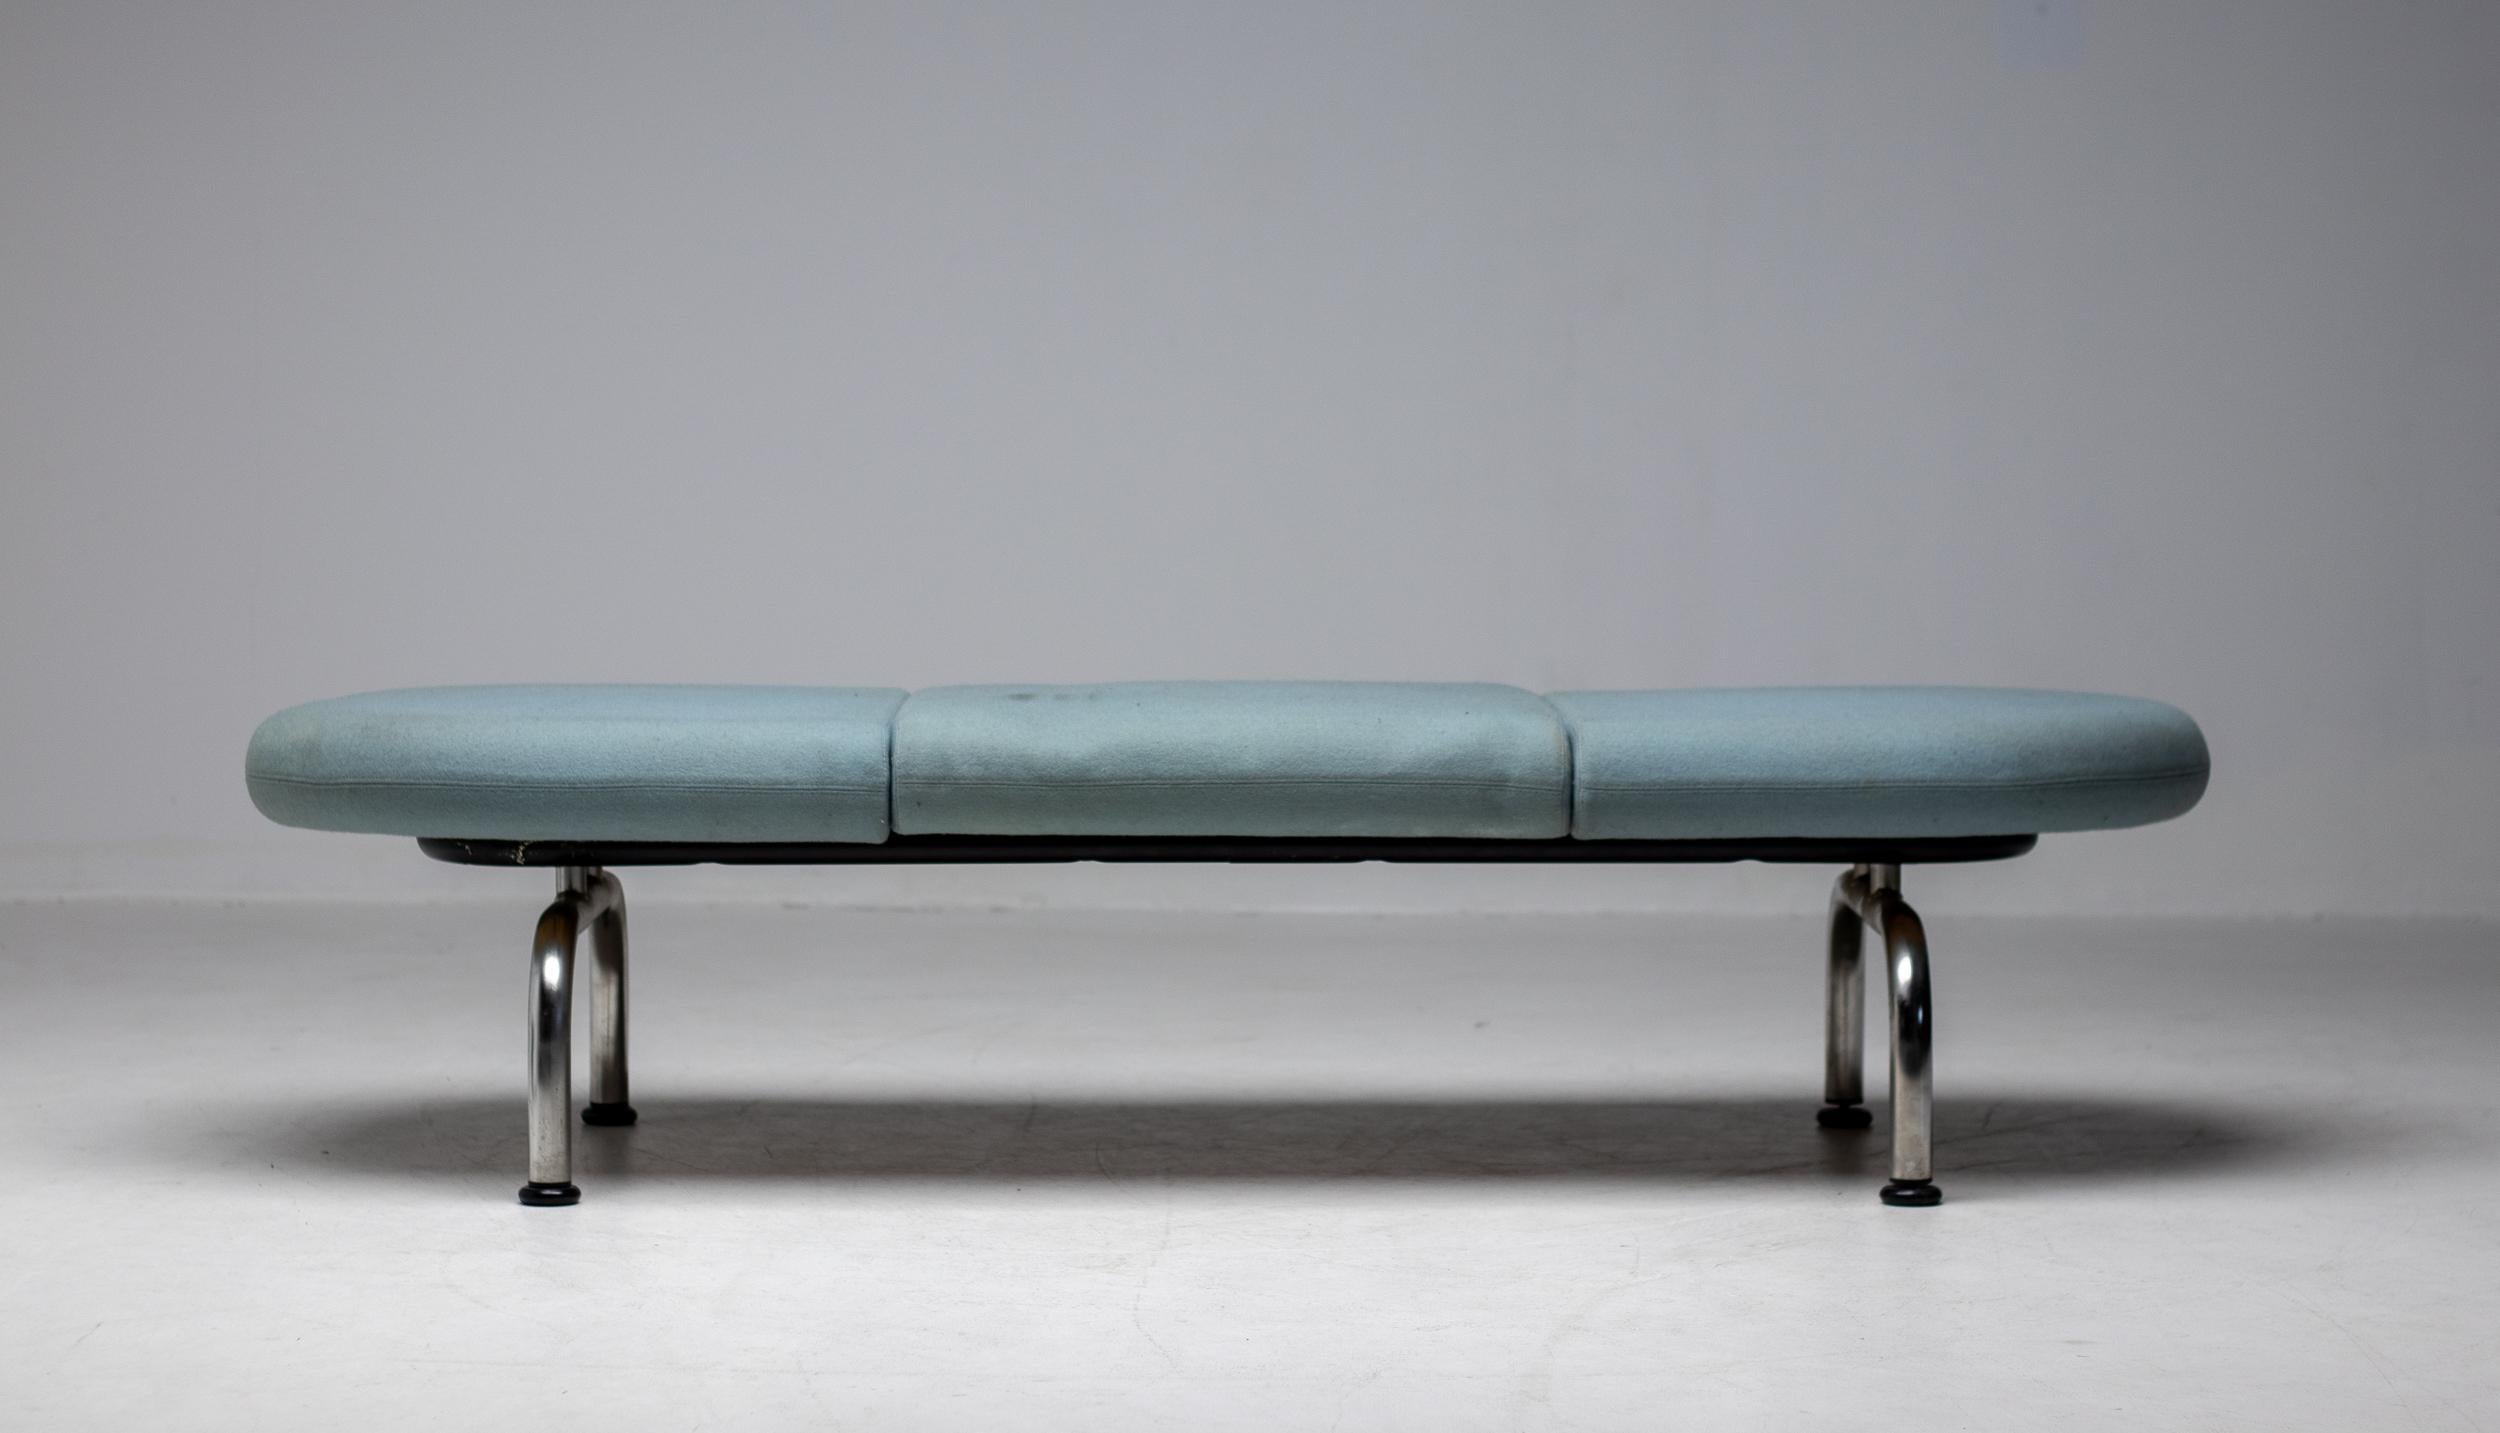 Stunning and rare Pipeline Bench by Erik Ole Jørgensen for Georg Jørgensen & Søn, Denmark, 1960.
The tubular legs are made in stainless steel and the top is upholstered in a grey/green Kvadrat fabric.
The foam is not resilient anymore and the fabric